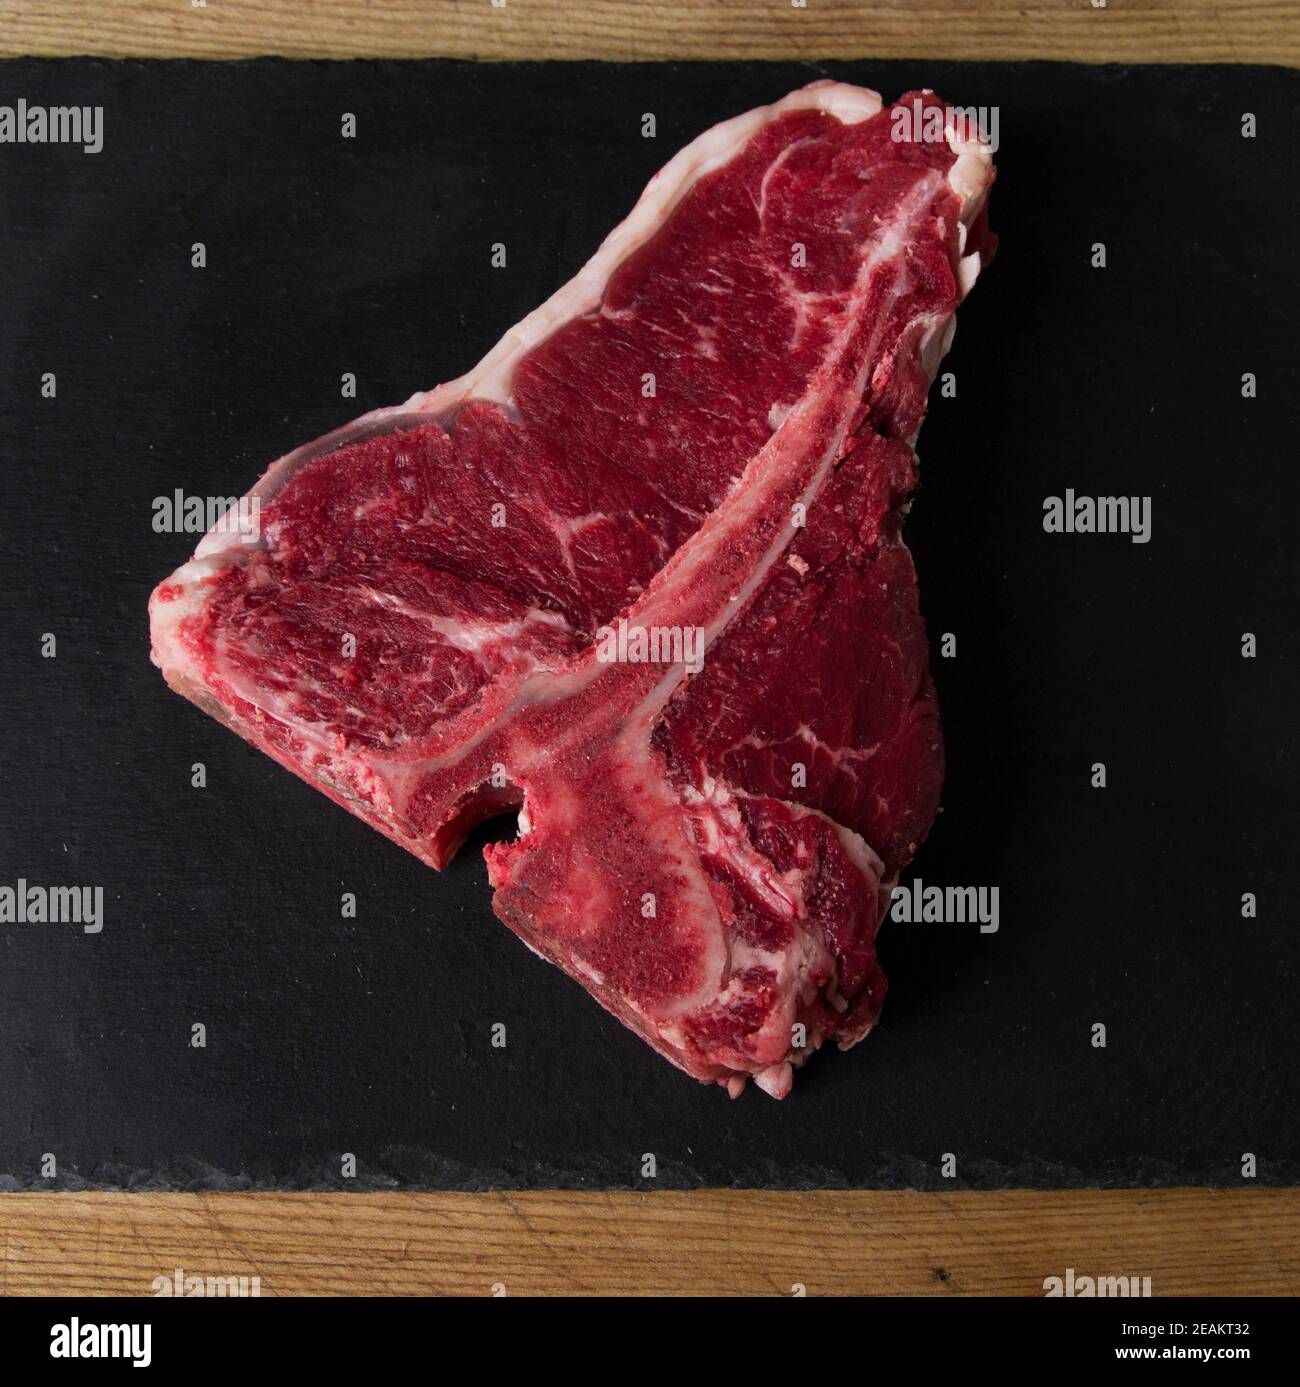 raw meat photographed on a wooden cutting board with a black background Stock Photo